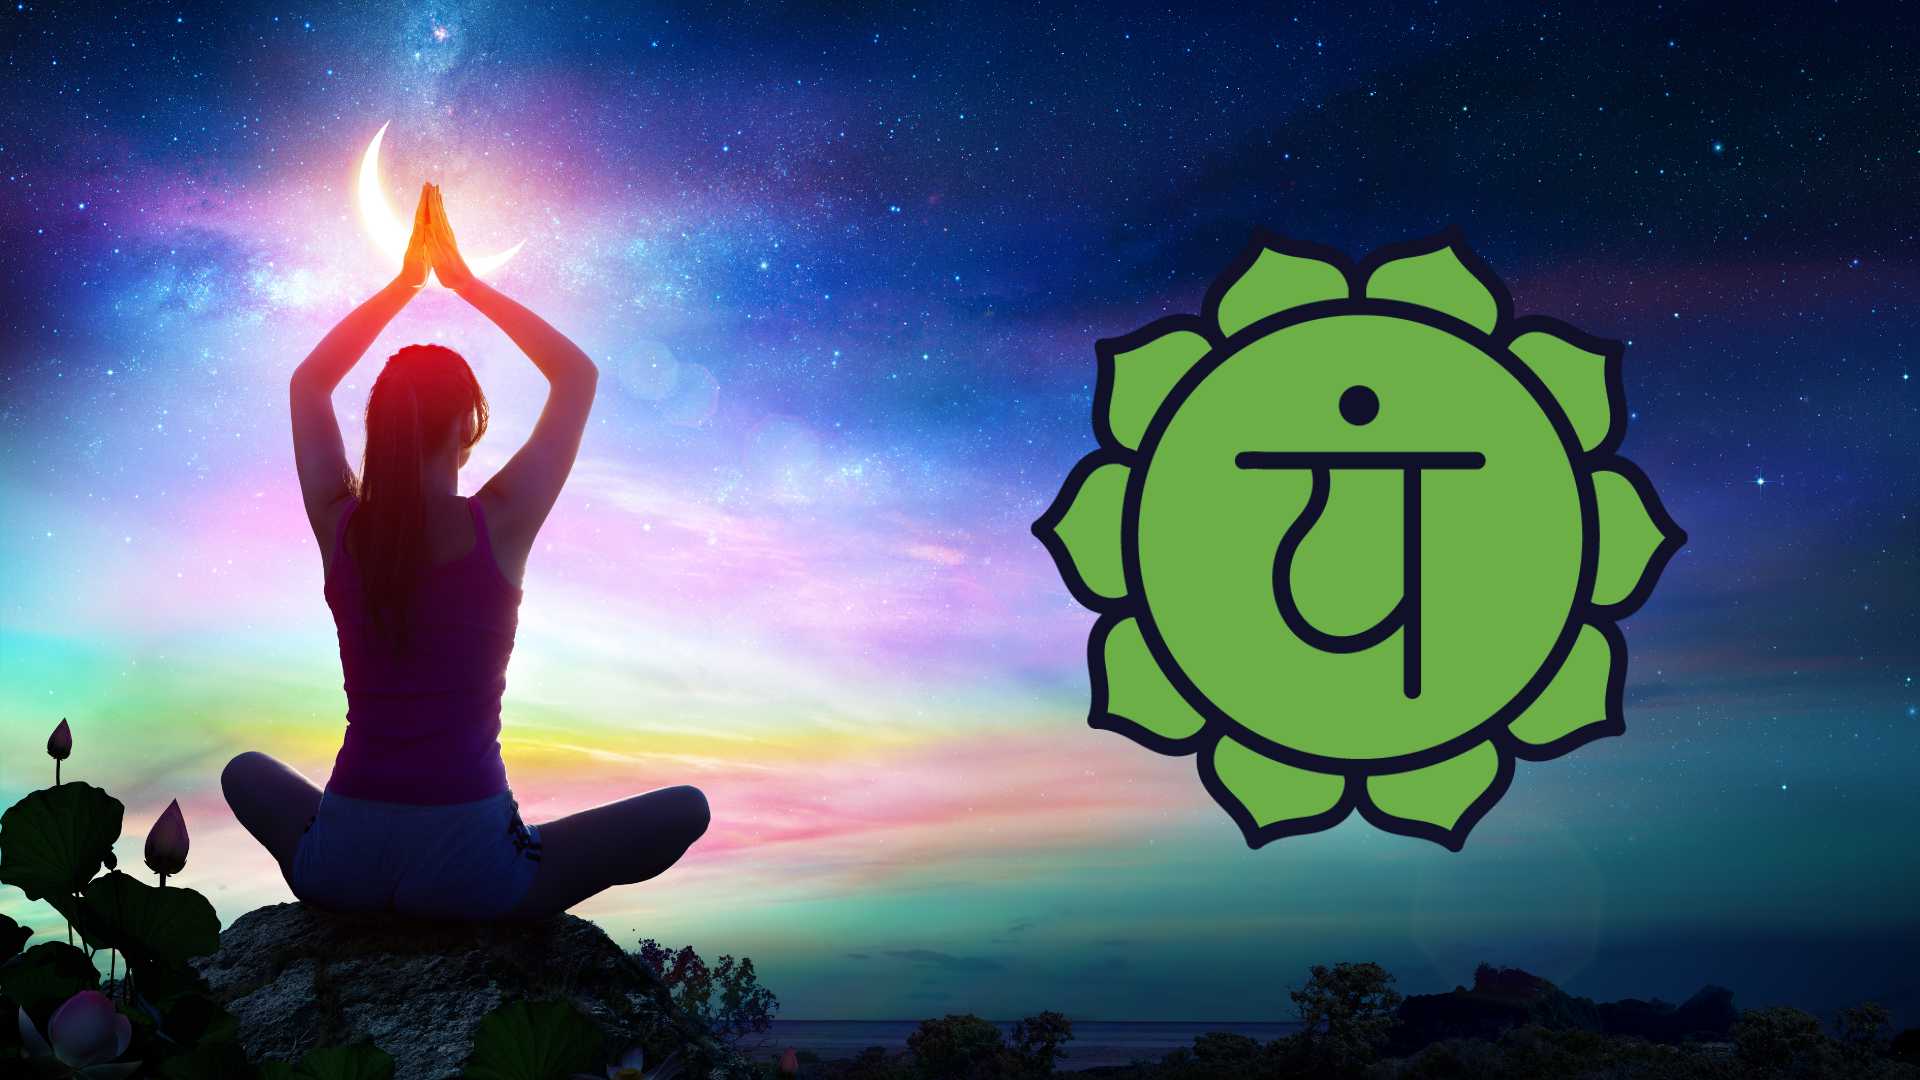 5 POSES TO STRENGTHEN YOUR HEART CHAKRA - Popular Vedic Science